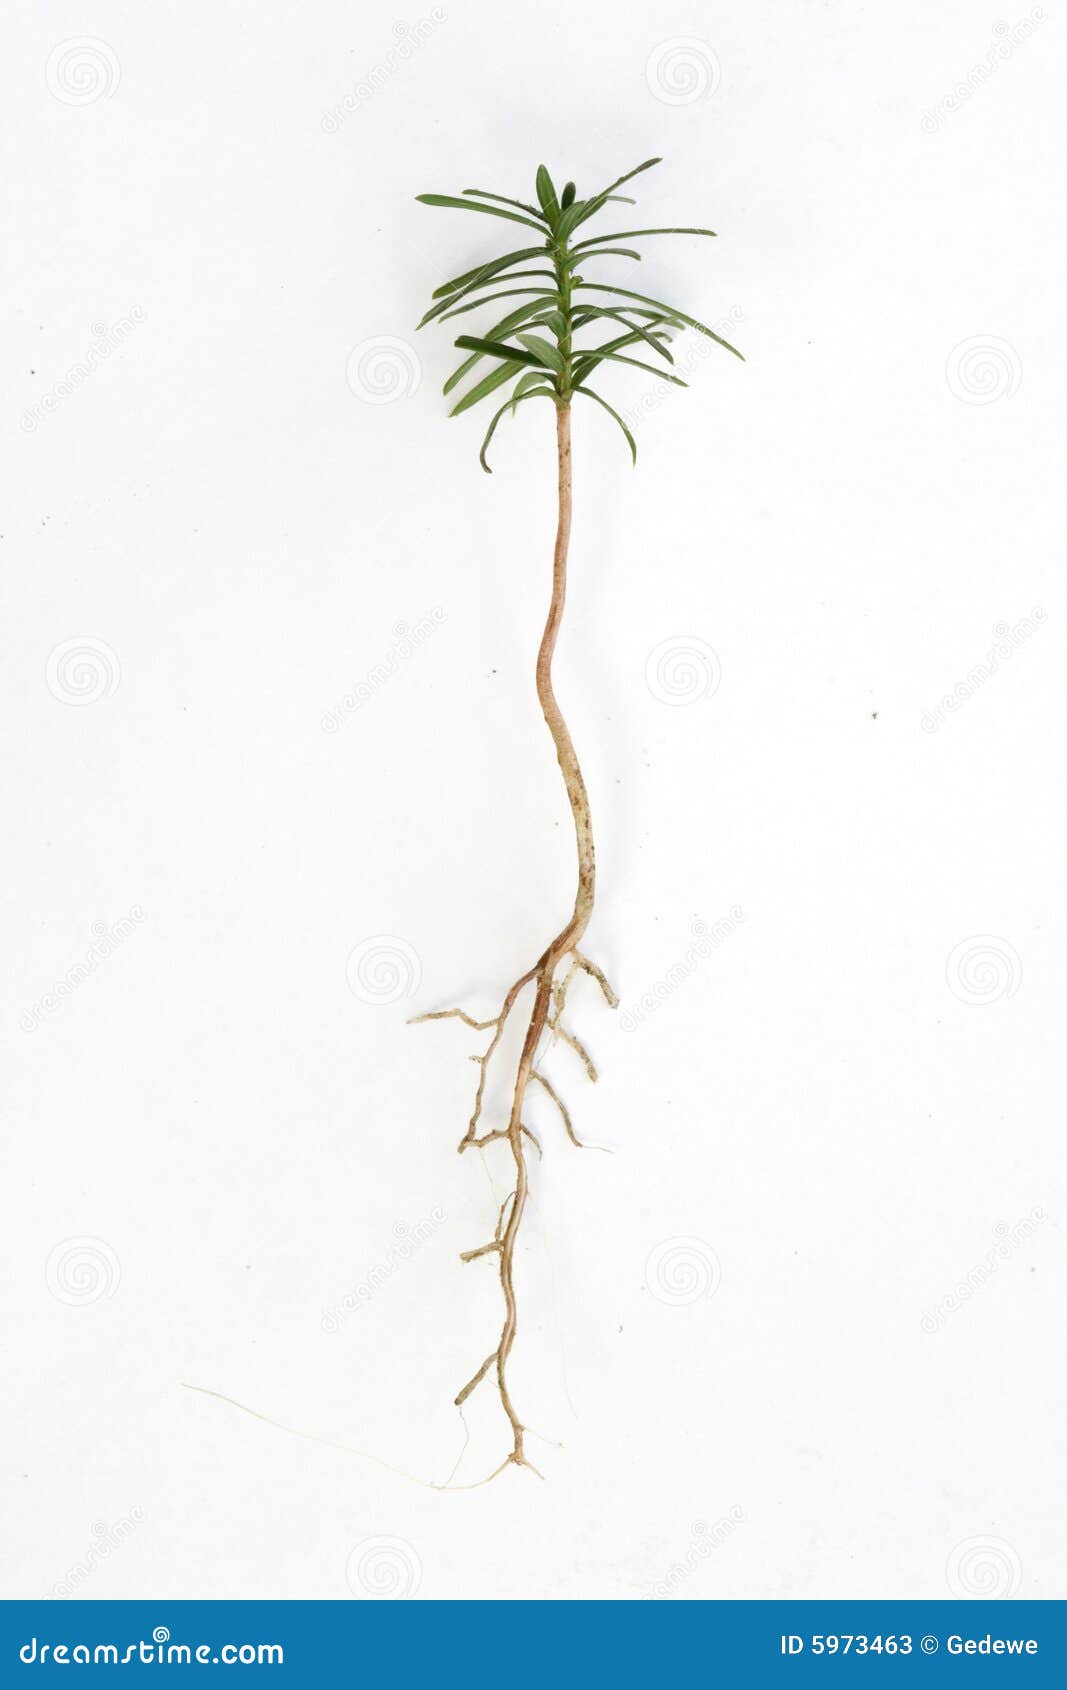 A young tree on a white background